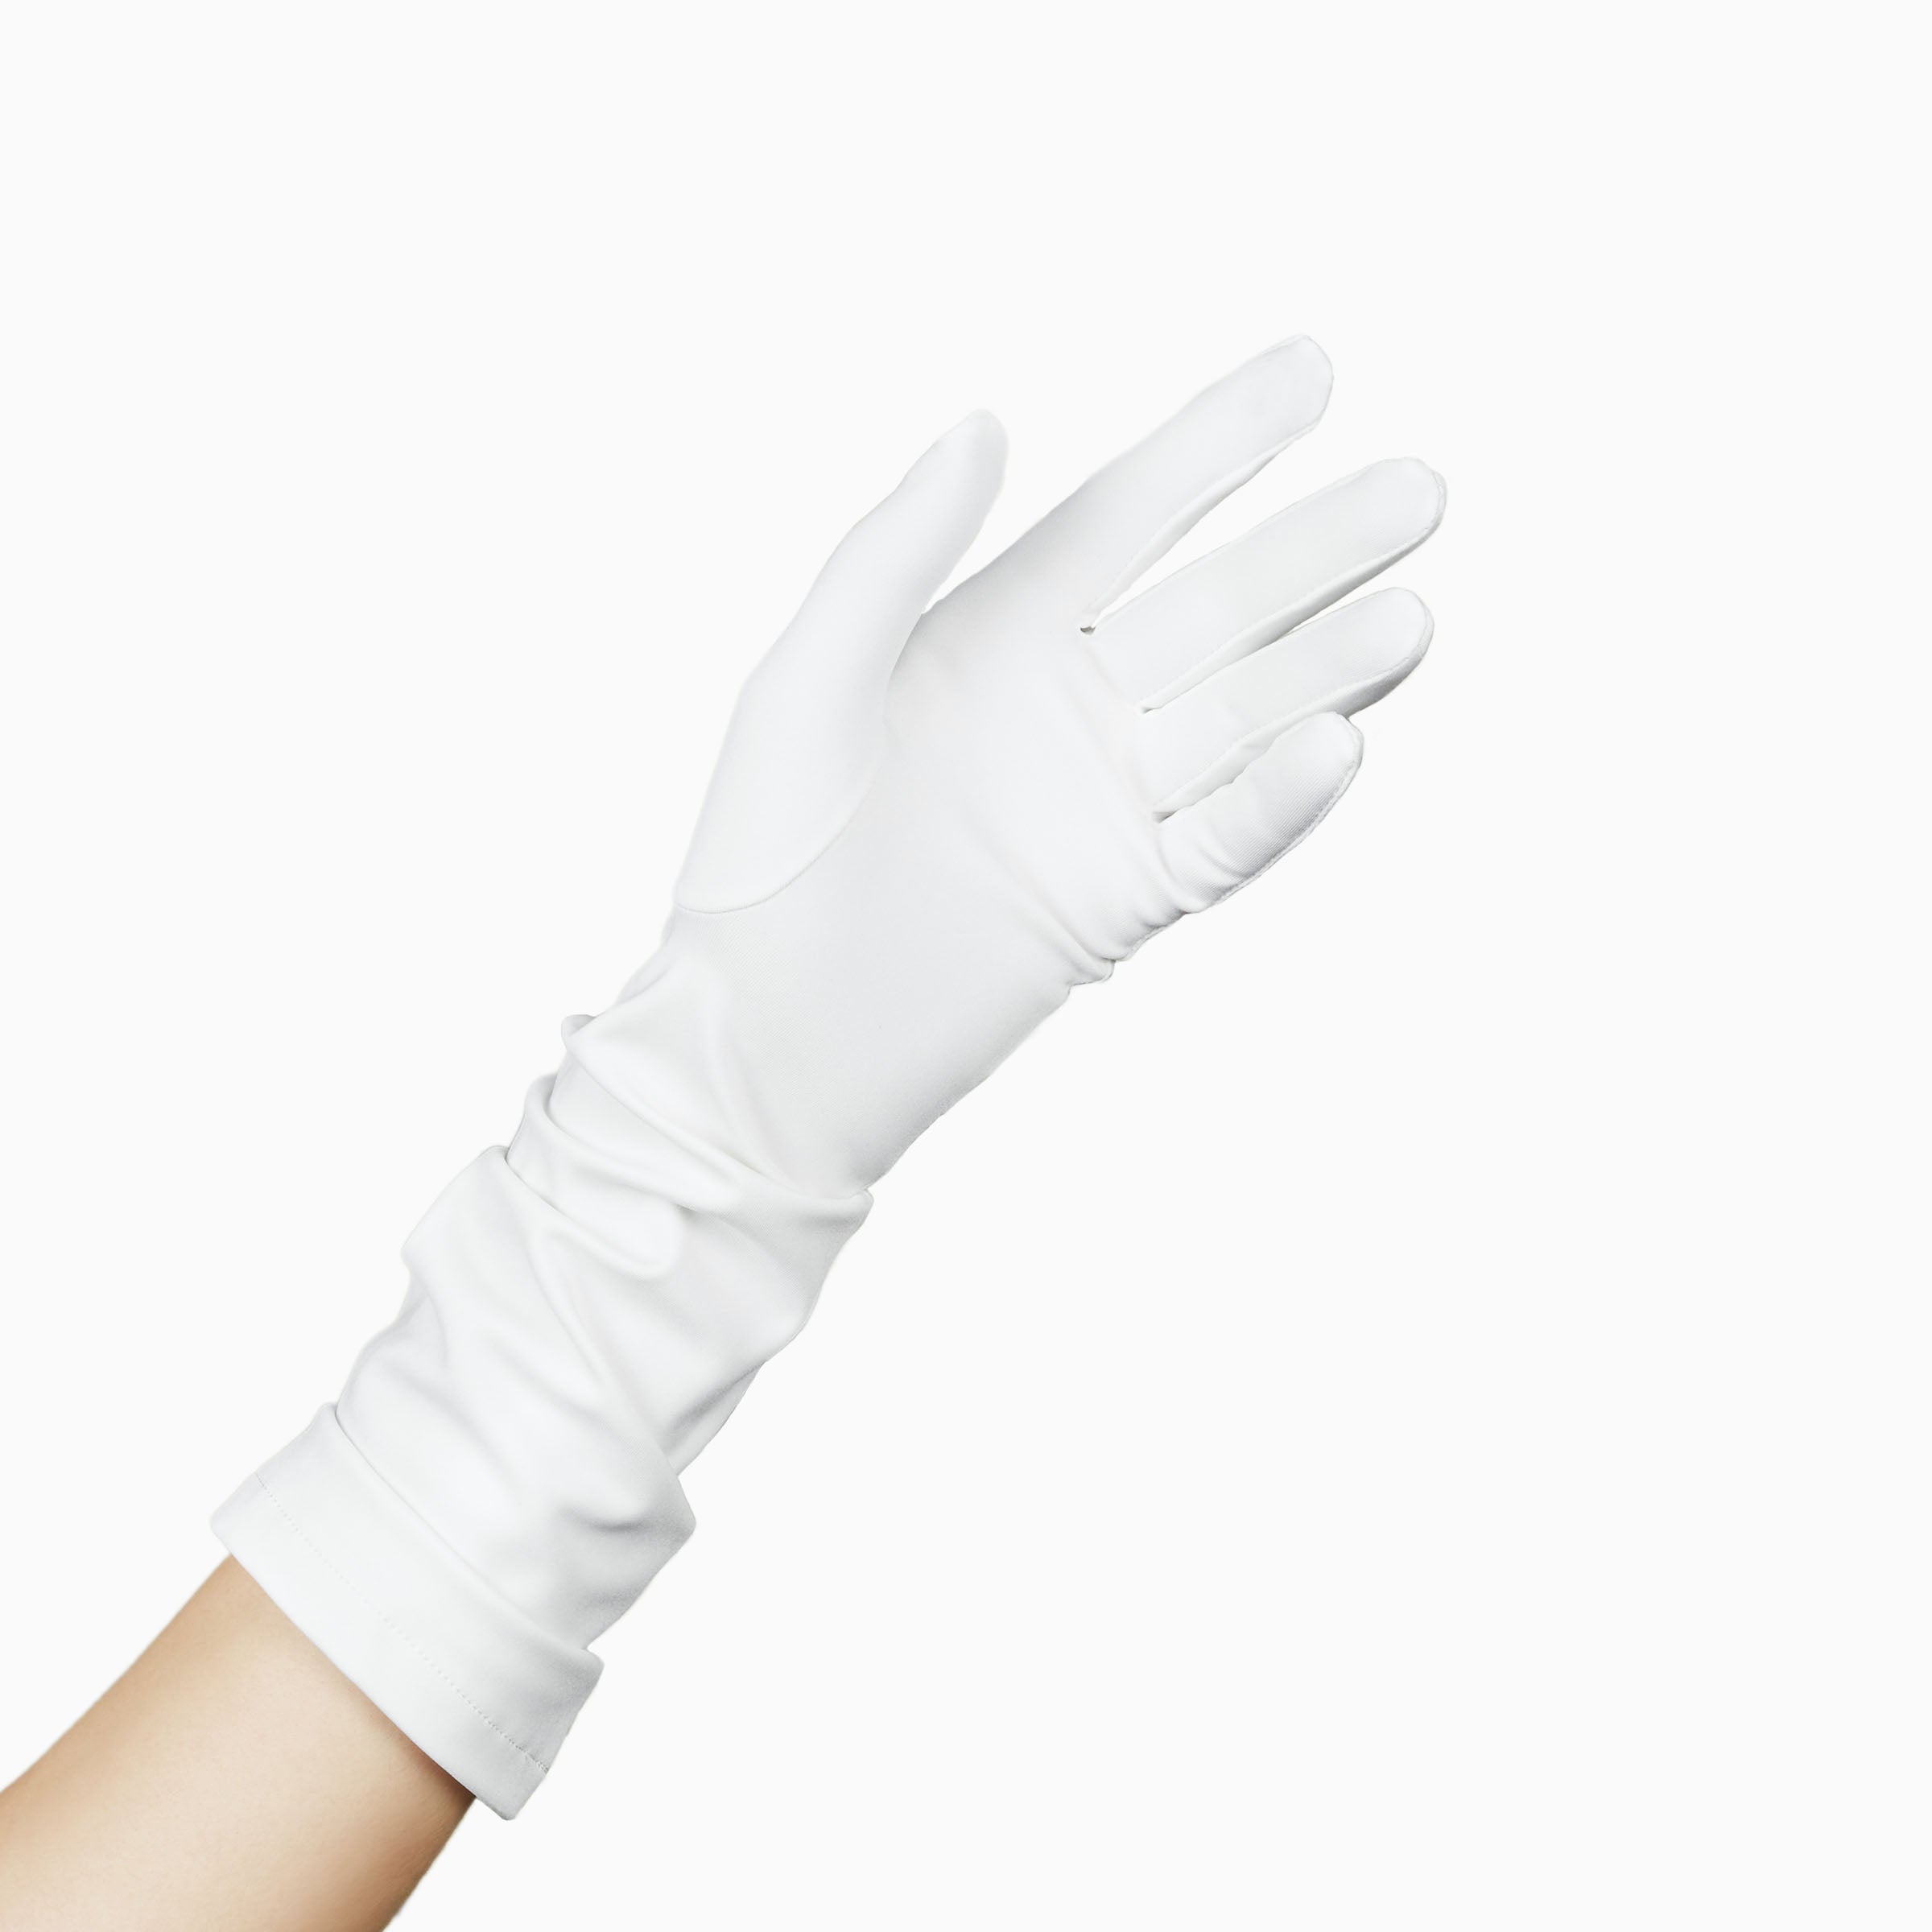 THE JILL mid length glove in white, palm open.